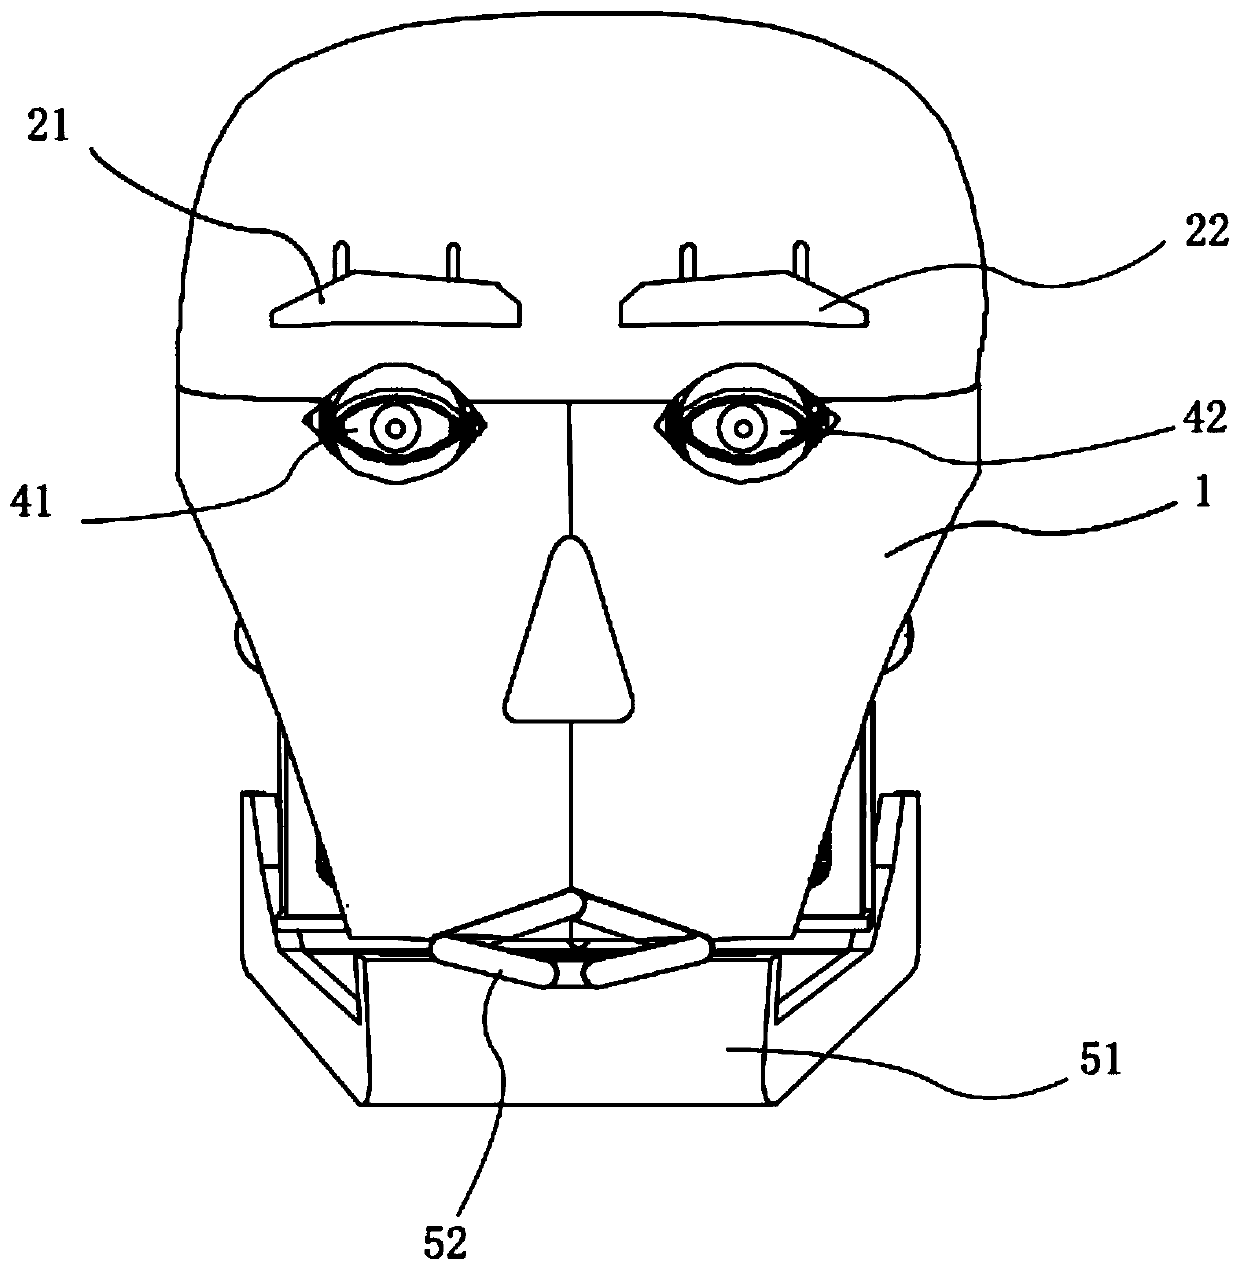 Anthropomorphic expression robot based on electroactive polymer driver